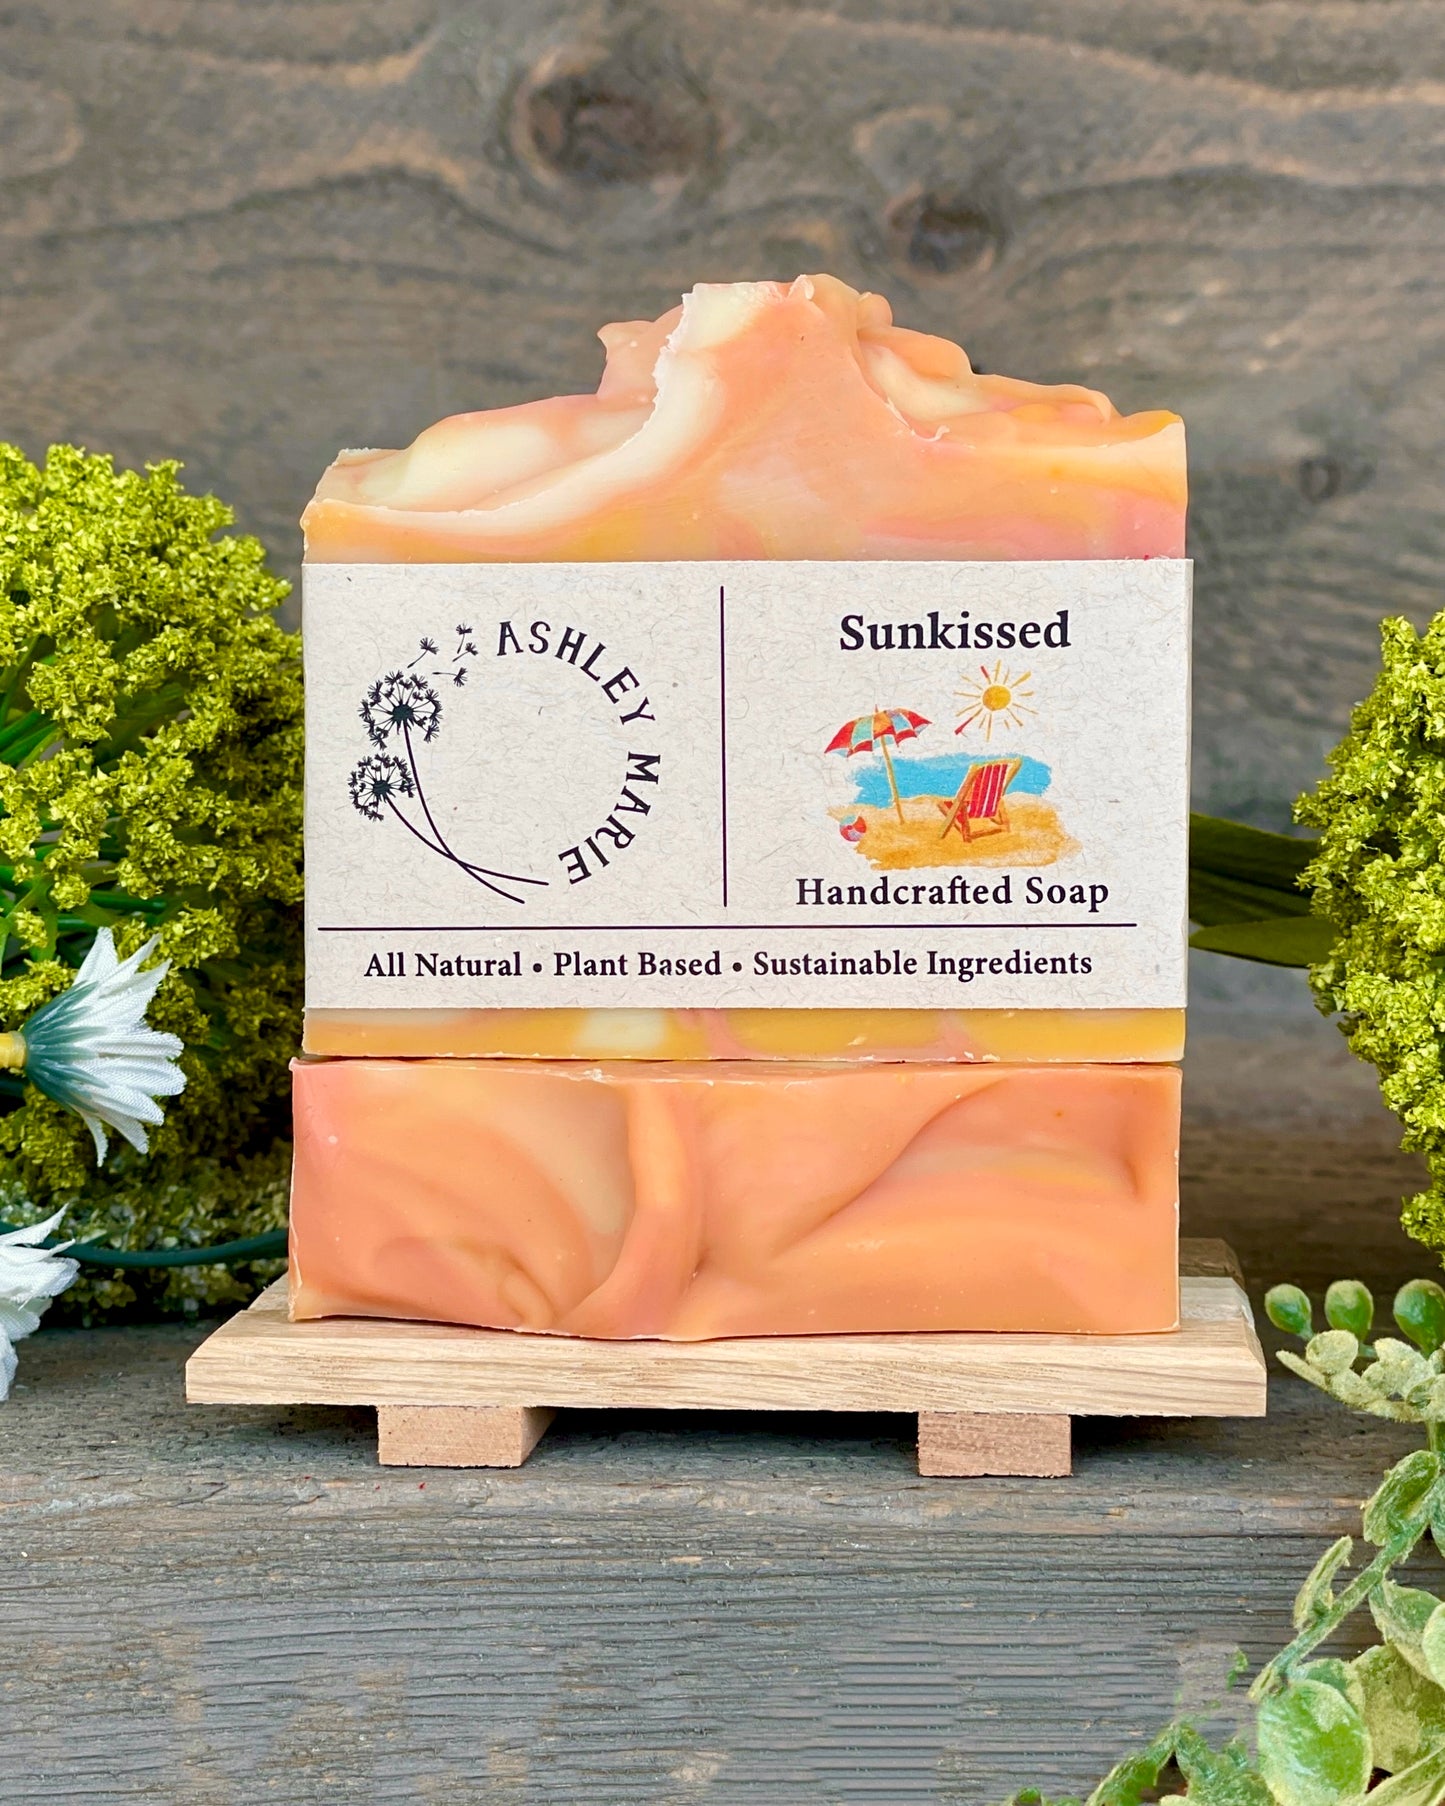 Summer Soap Collection